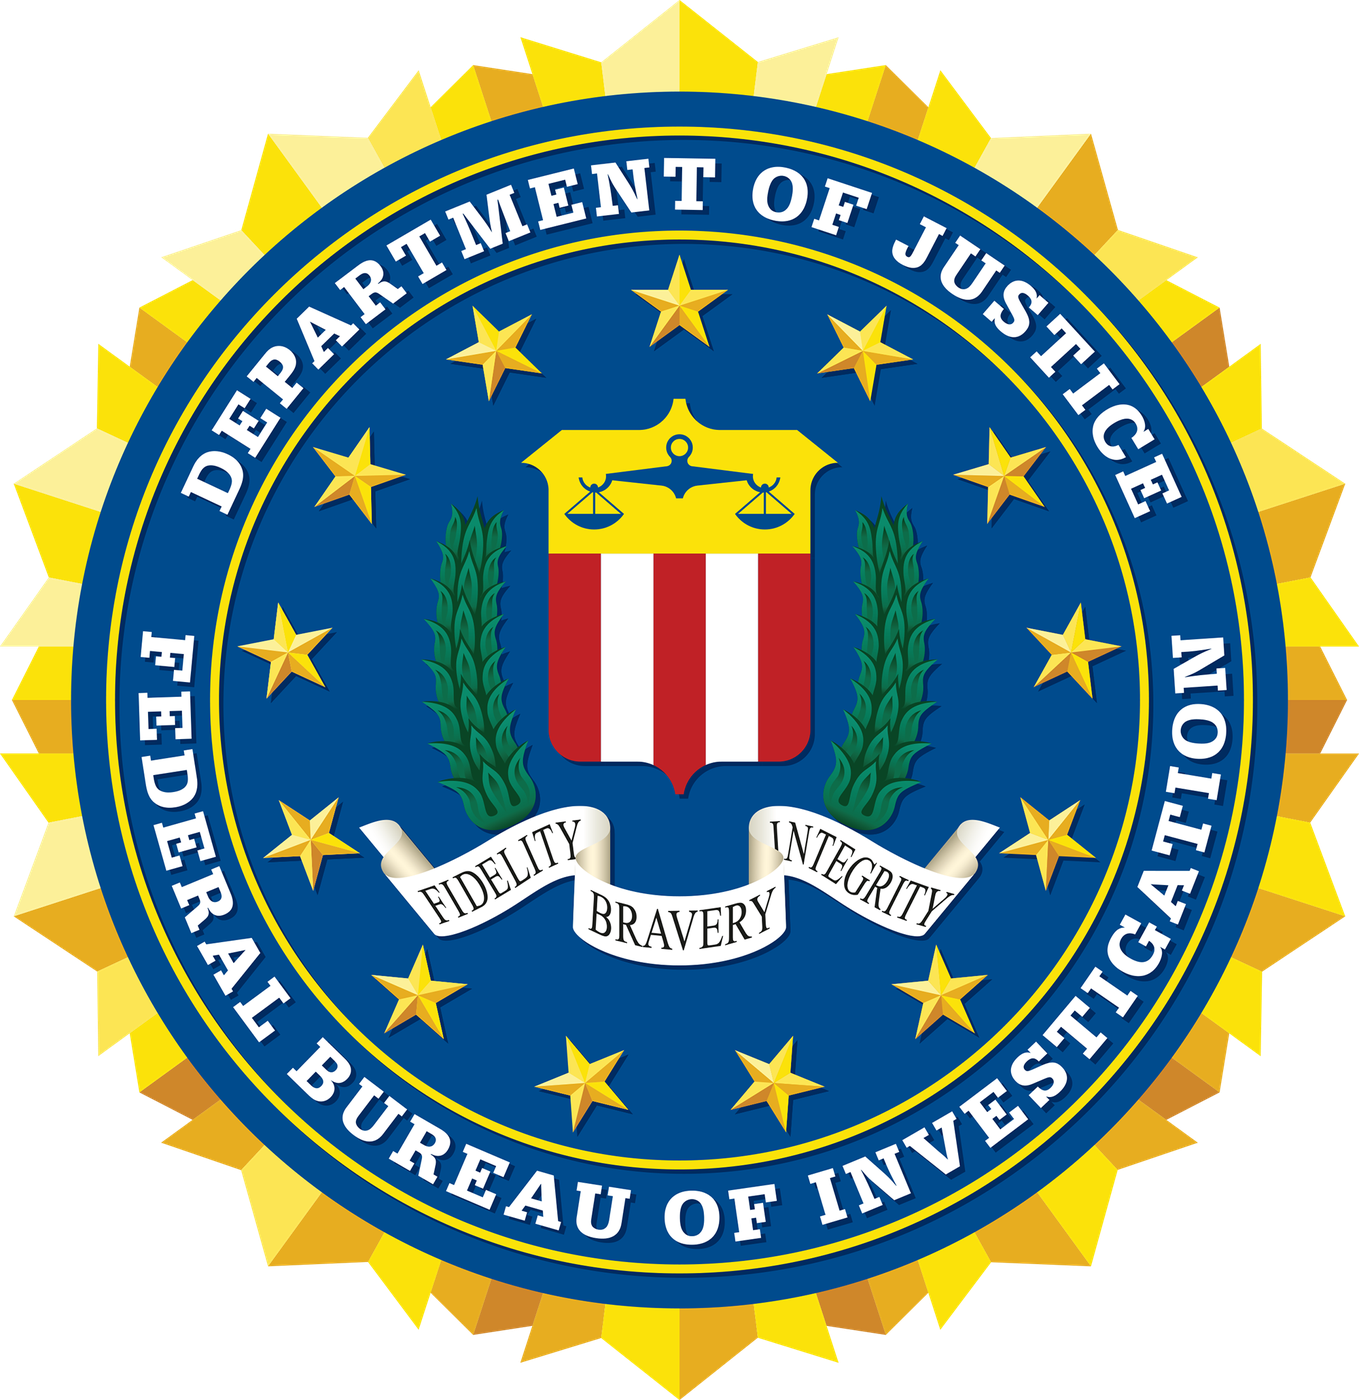 The motto, “ Fidelity, Bravery, Integrity,” succinctly describes the motivating force behind the men and women of the FBI.